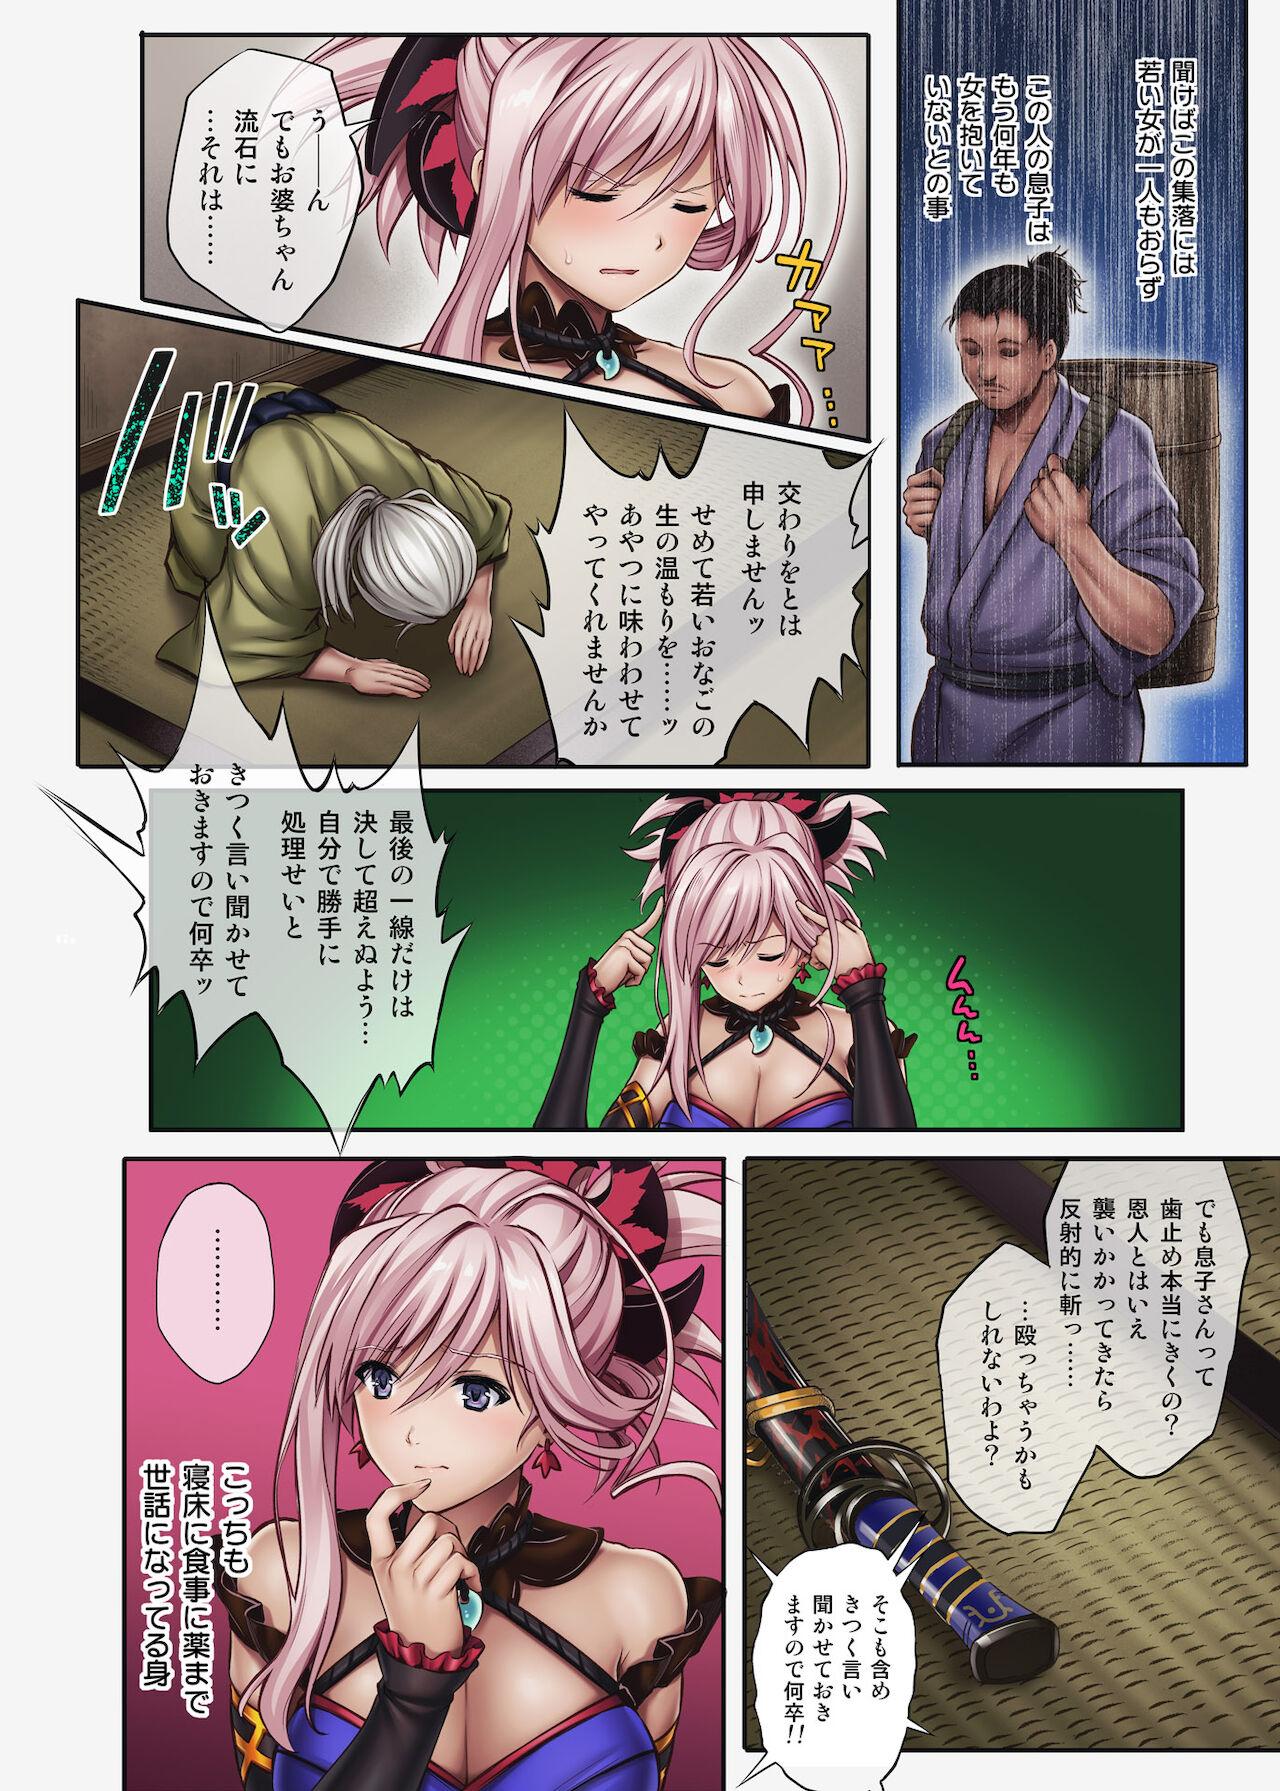 Teenporn Cyclone no Doujinshi Full Color Pack 4 - Fate grand order Fucks - Page 9